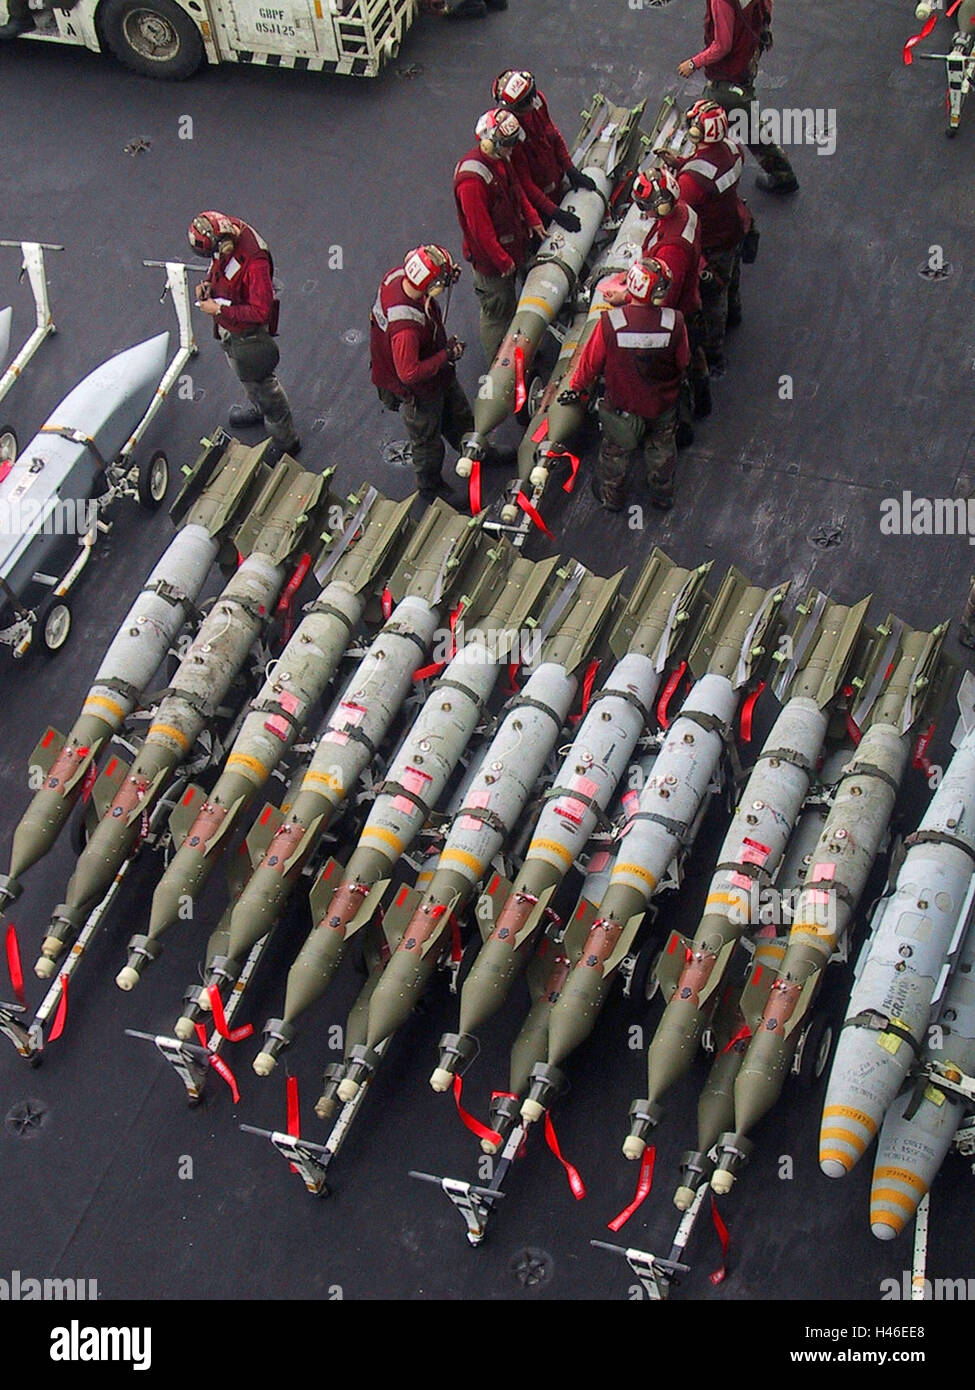 31st March 2003 Operation Iraqi Freedom: bombs on their trolleys on the flight deck of the U.S. aircraft carrier USS Abraham Lincoln. Stock Photo